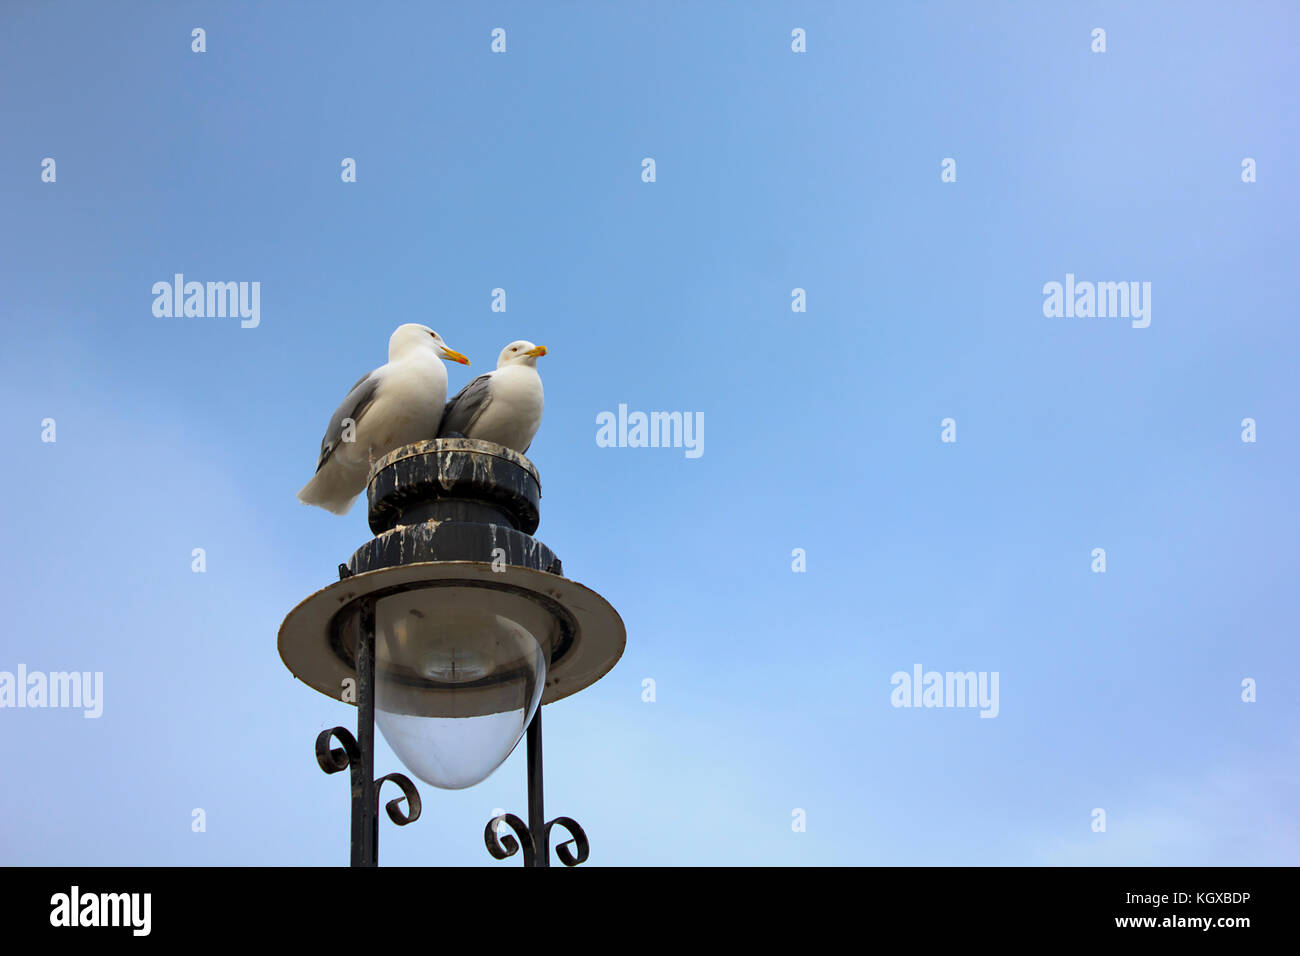 A pair of Seagulls sitting on top of a street light near seaside. Stock Photo